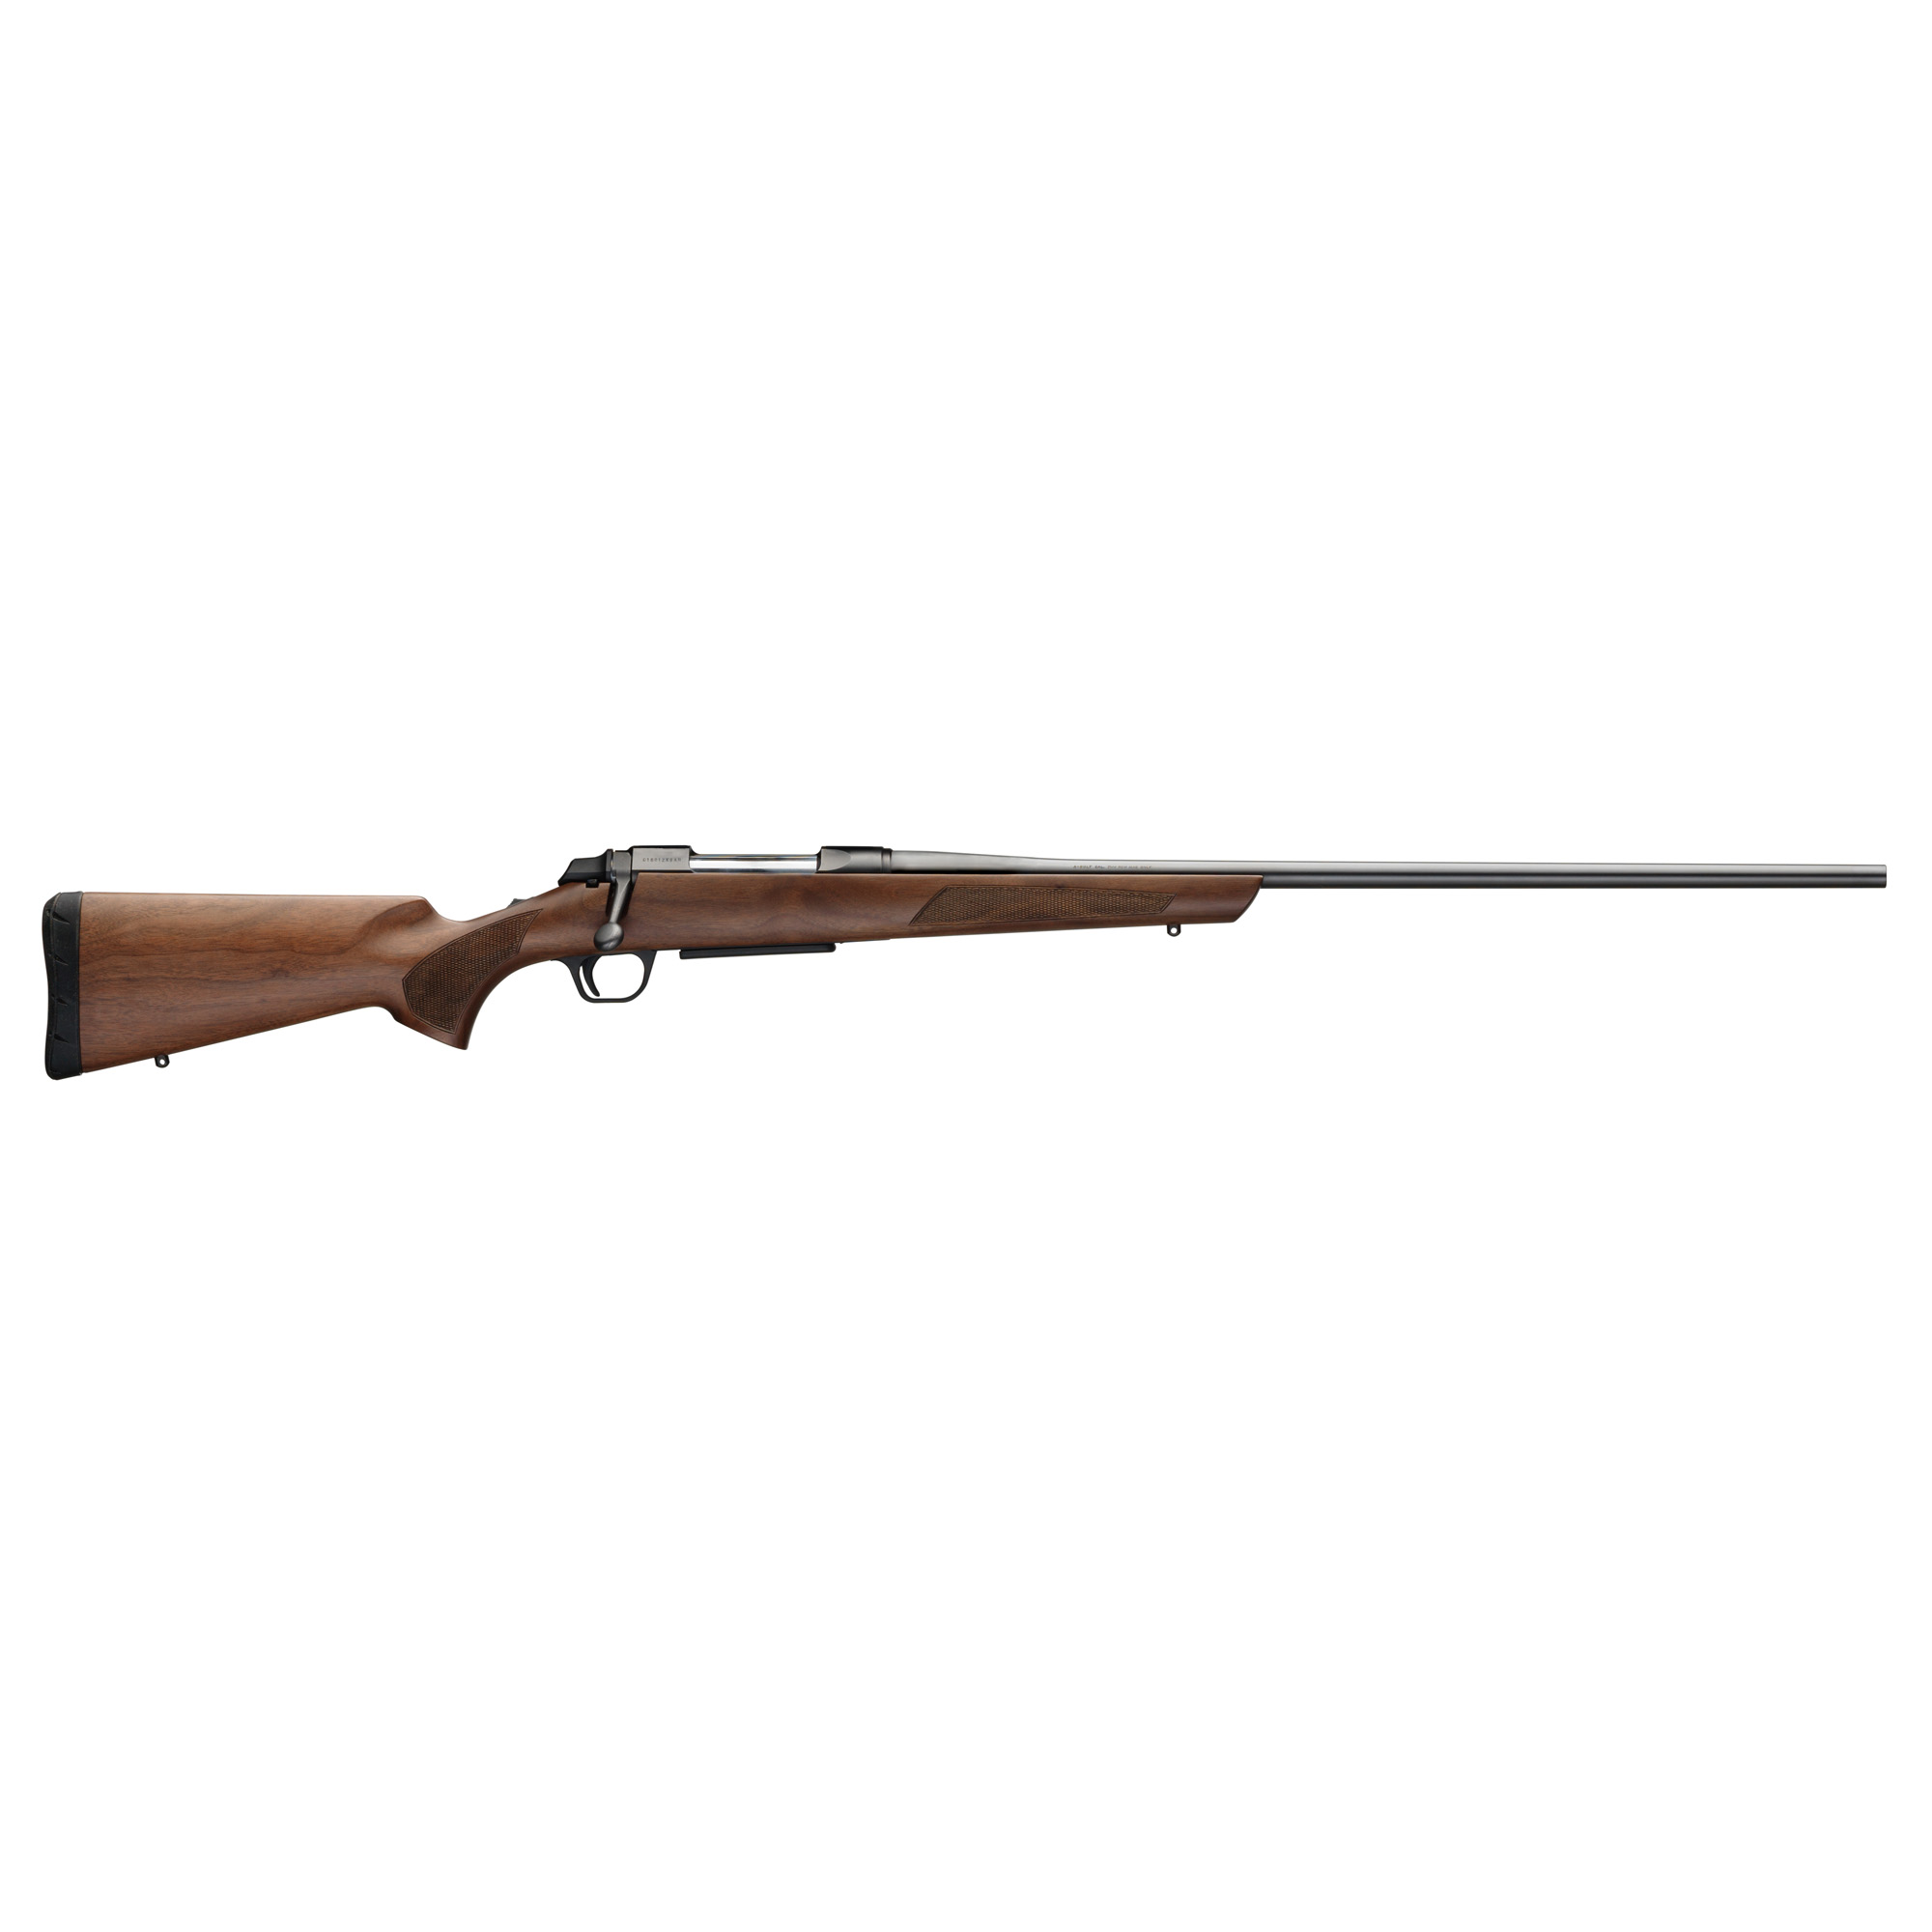 Browning, AB3, Hunter, Bolt Action Rifle, 308 Winchester, 22" Barrel, Blued Finish, Walnut Stock, 5 Rounds